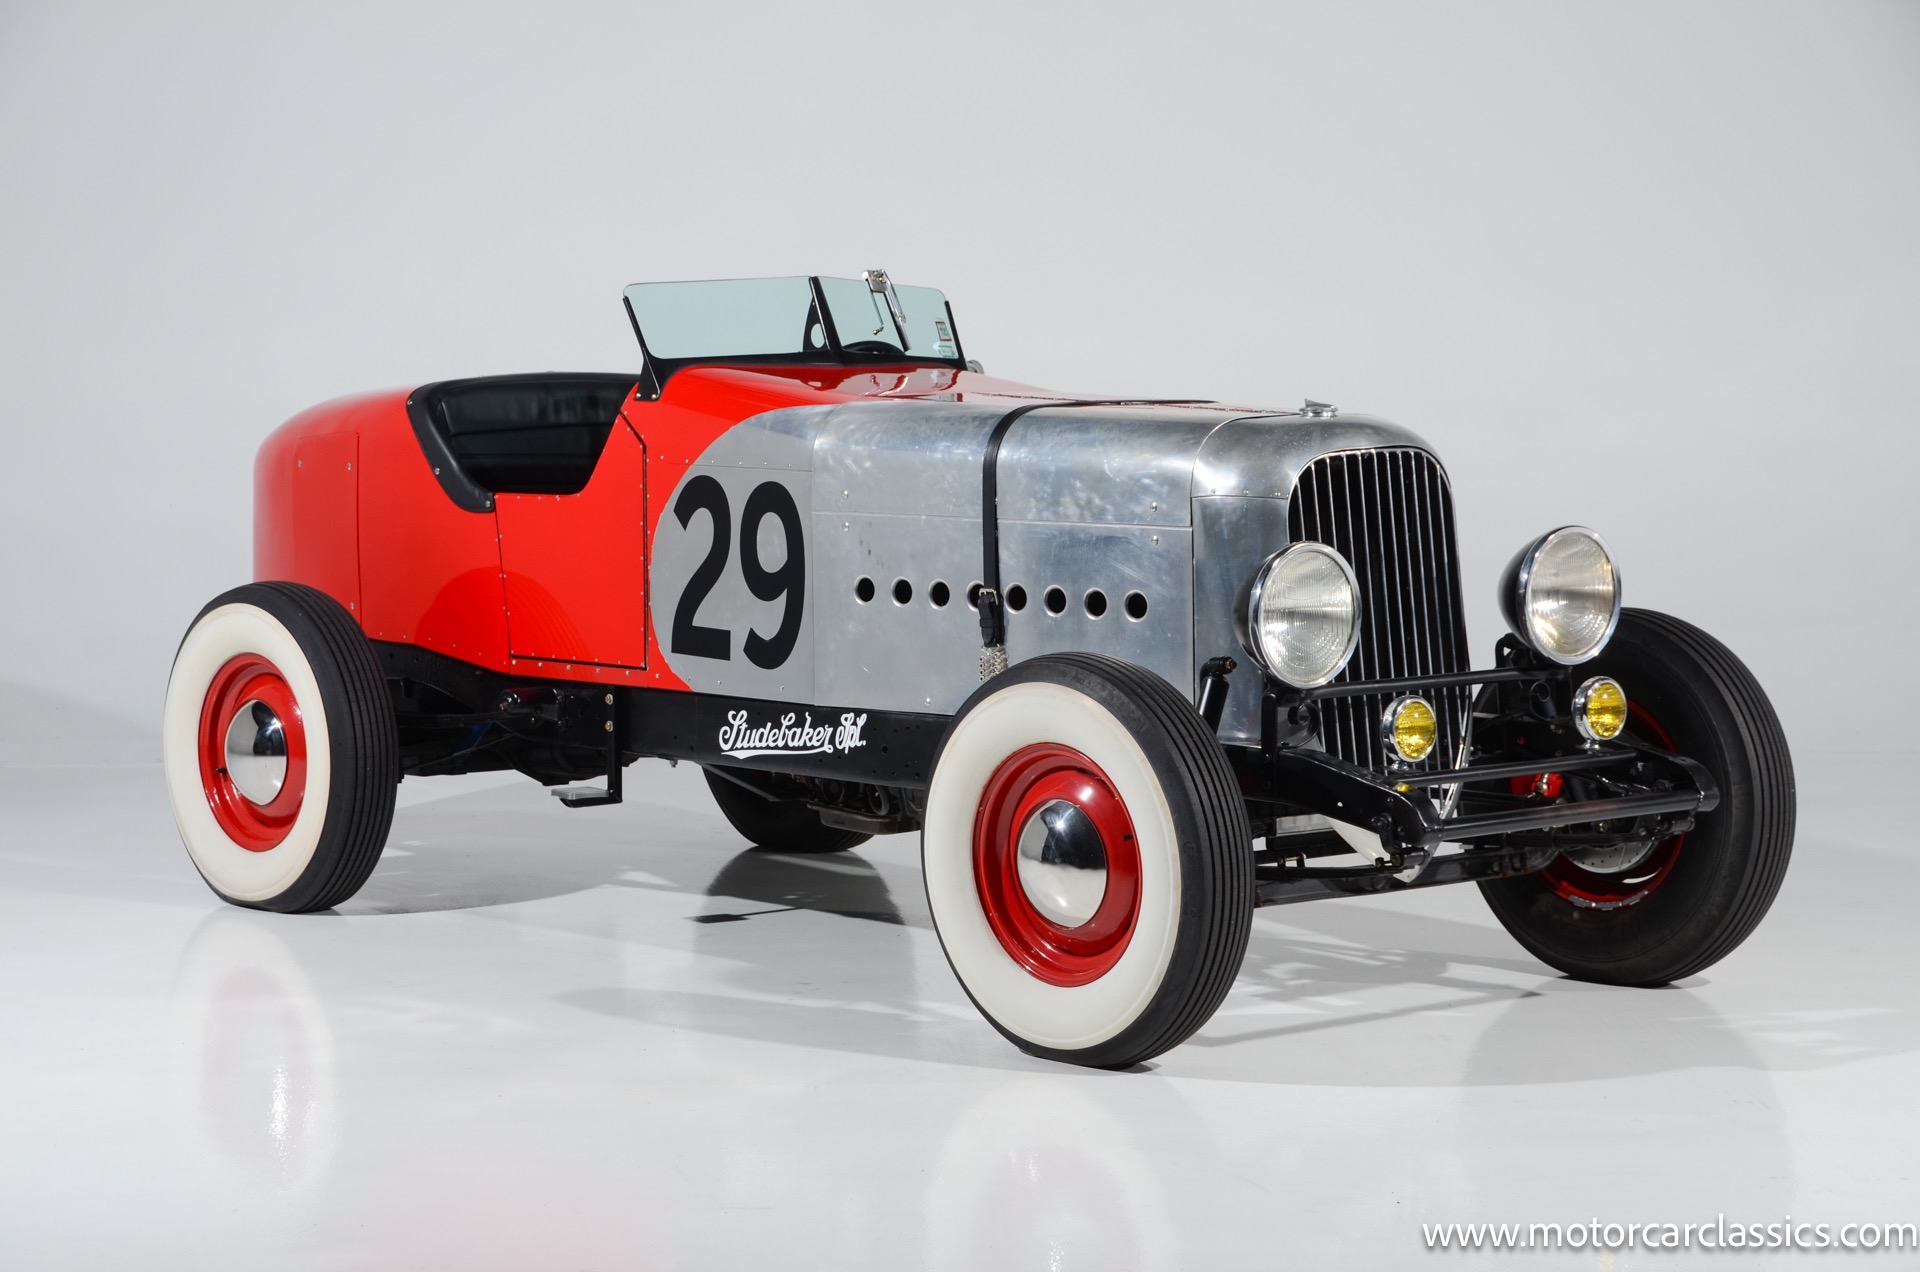 1932 Studebaker Indy Car For Sale | Vintage Driving Machines